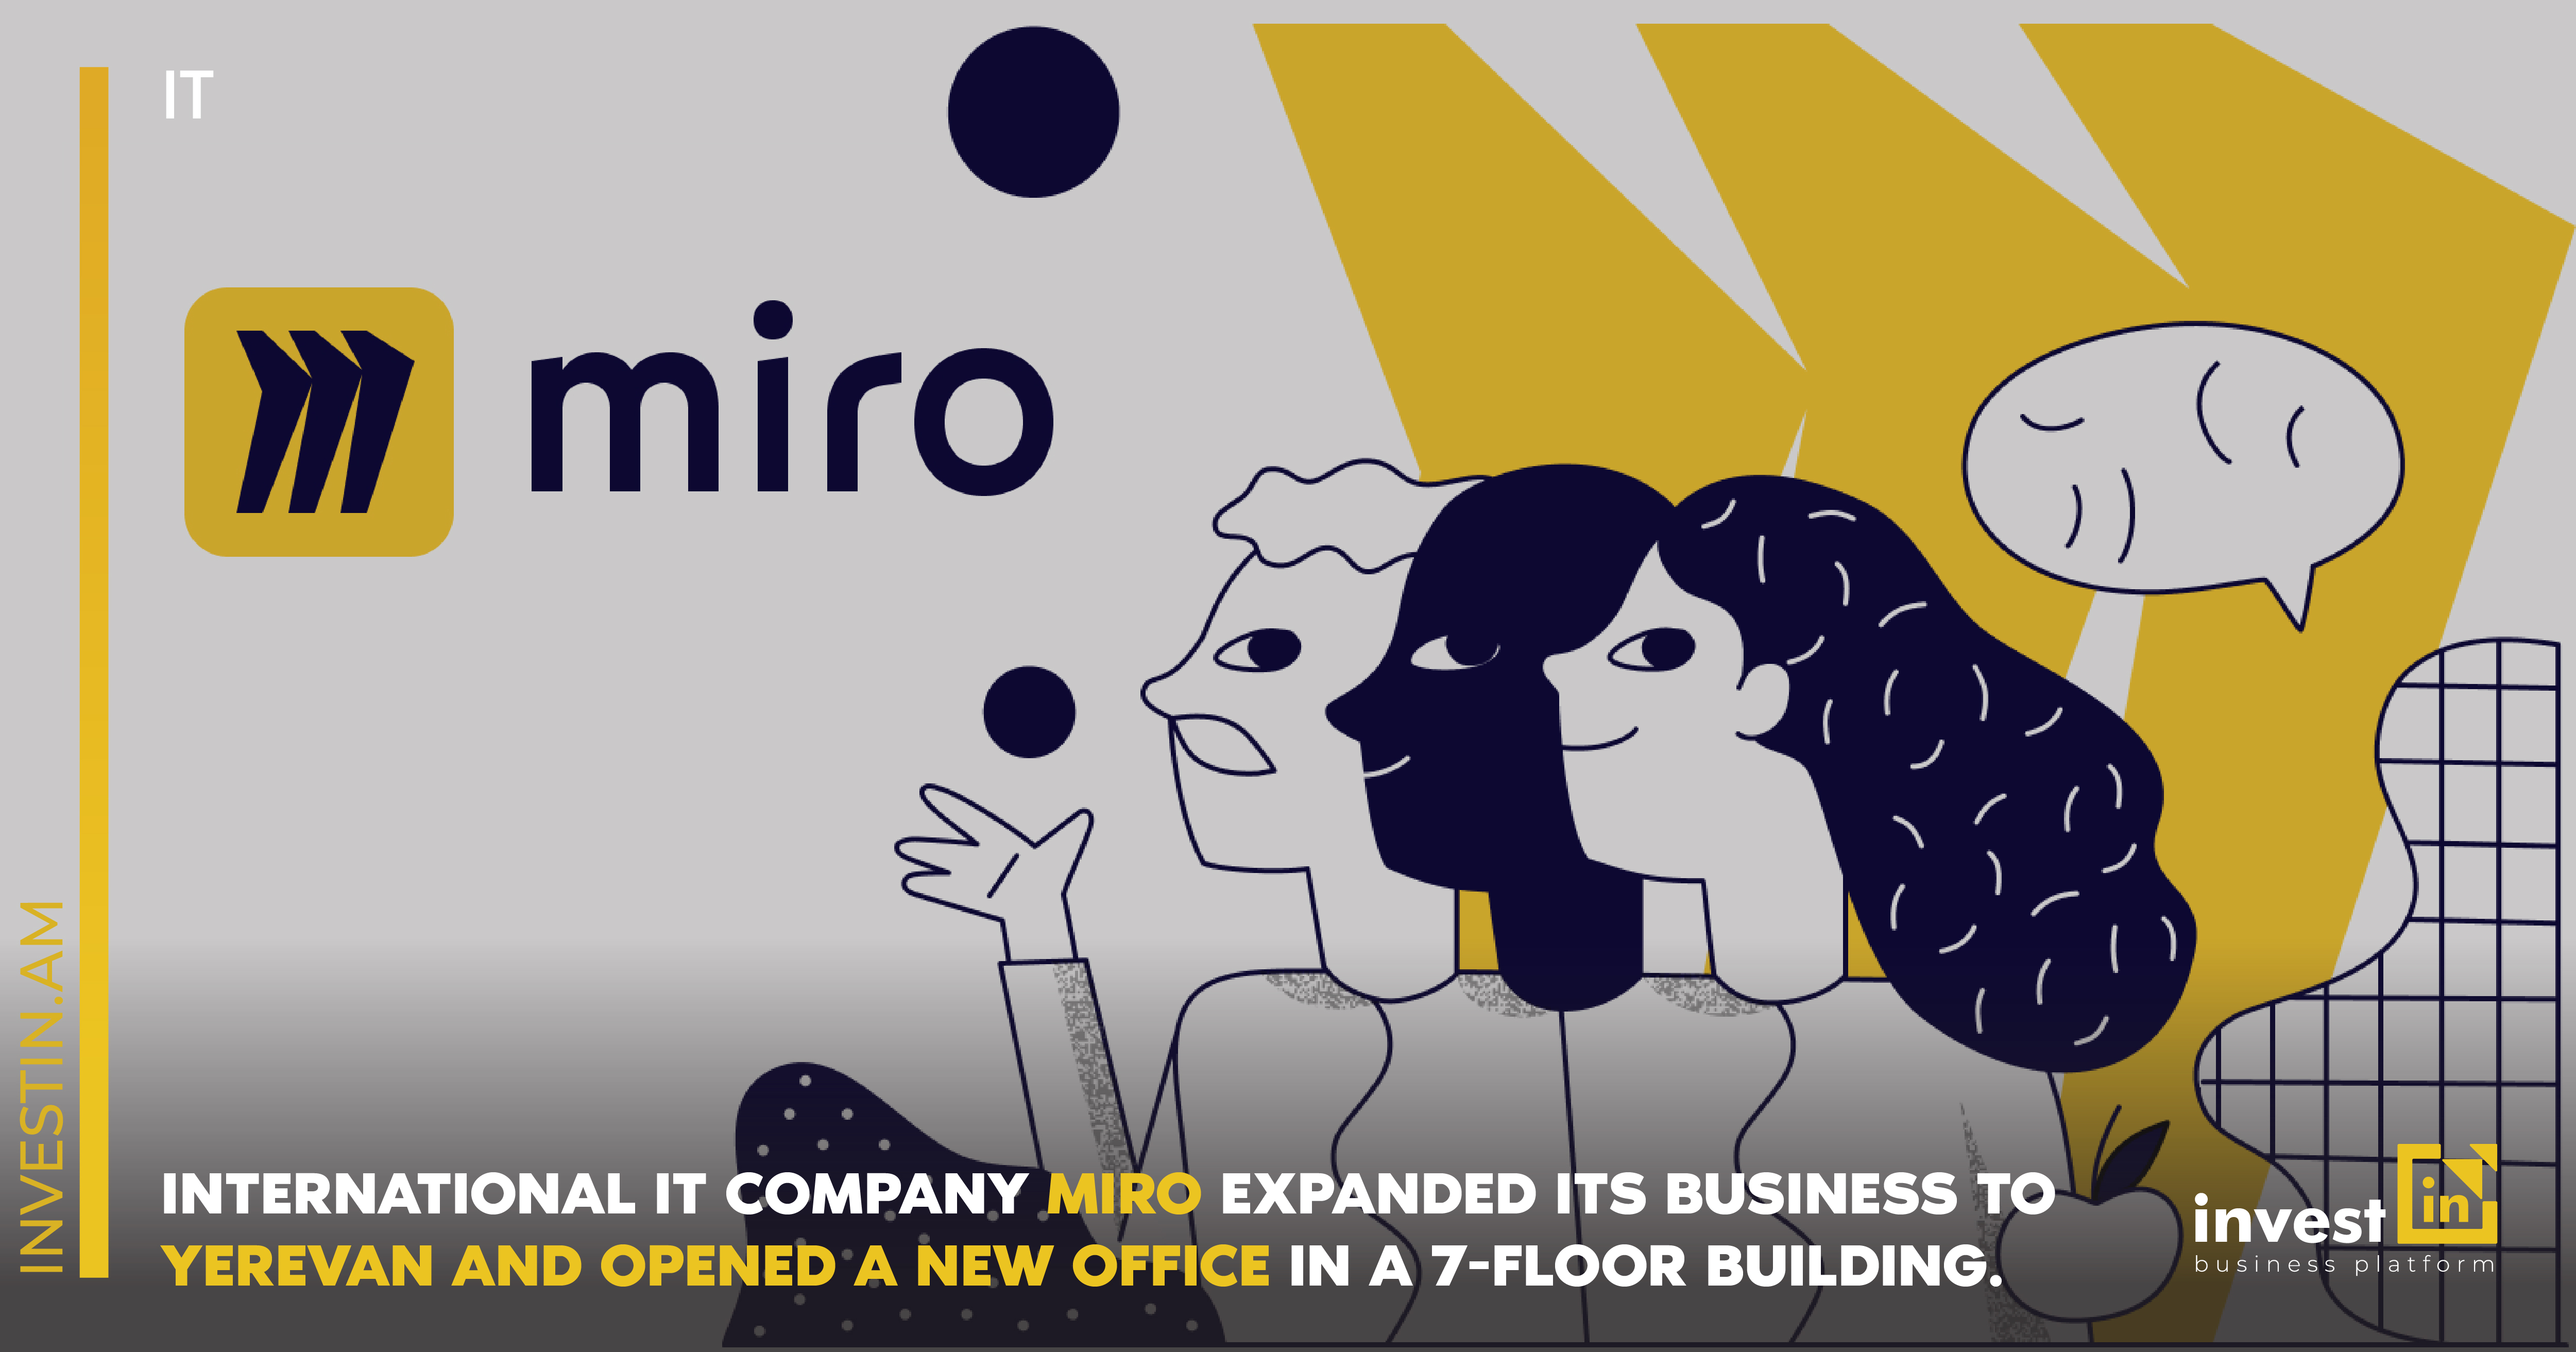 International IT company Miro expanded its business to Yerevan and opened a  new office in a 7-floor building